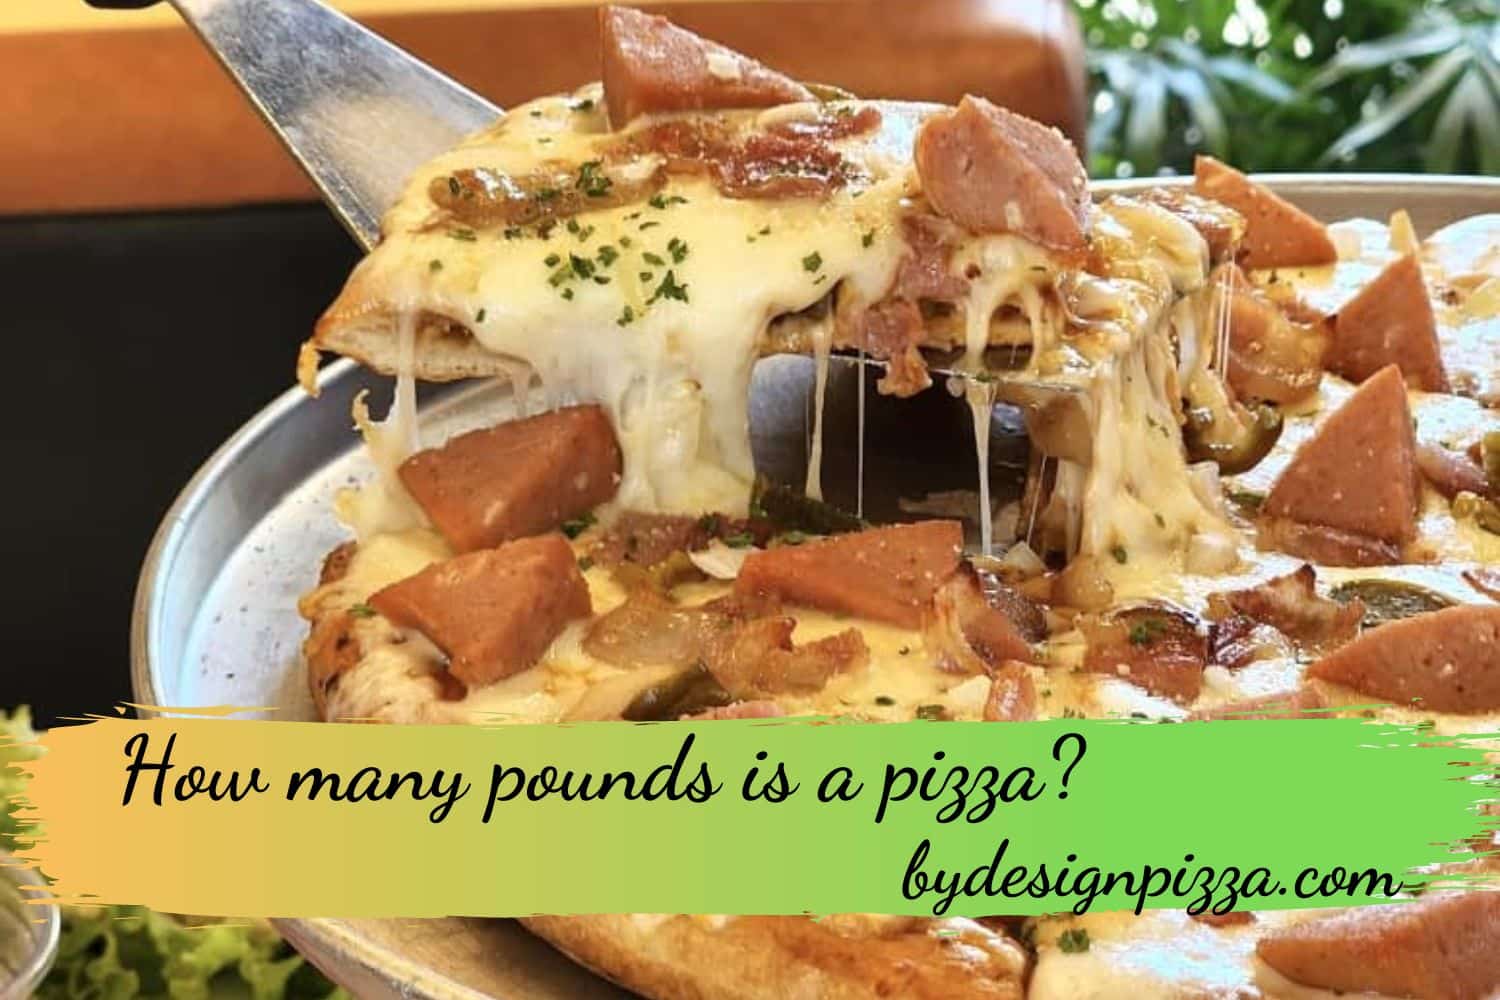 How many pounds is a pizza?